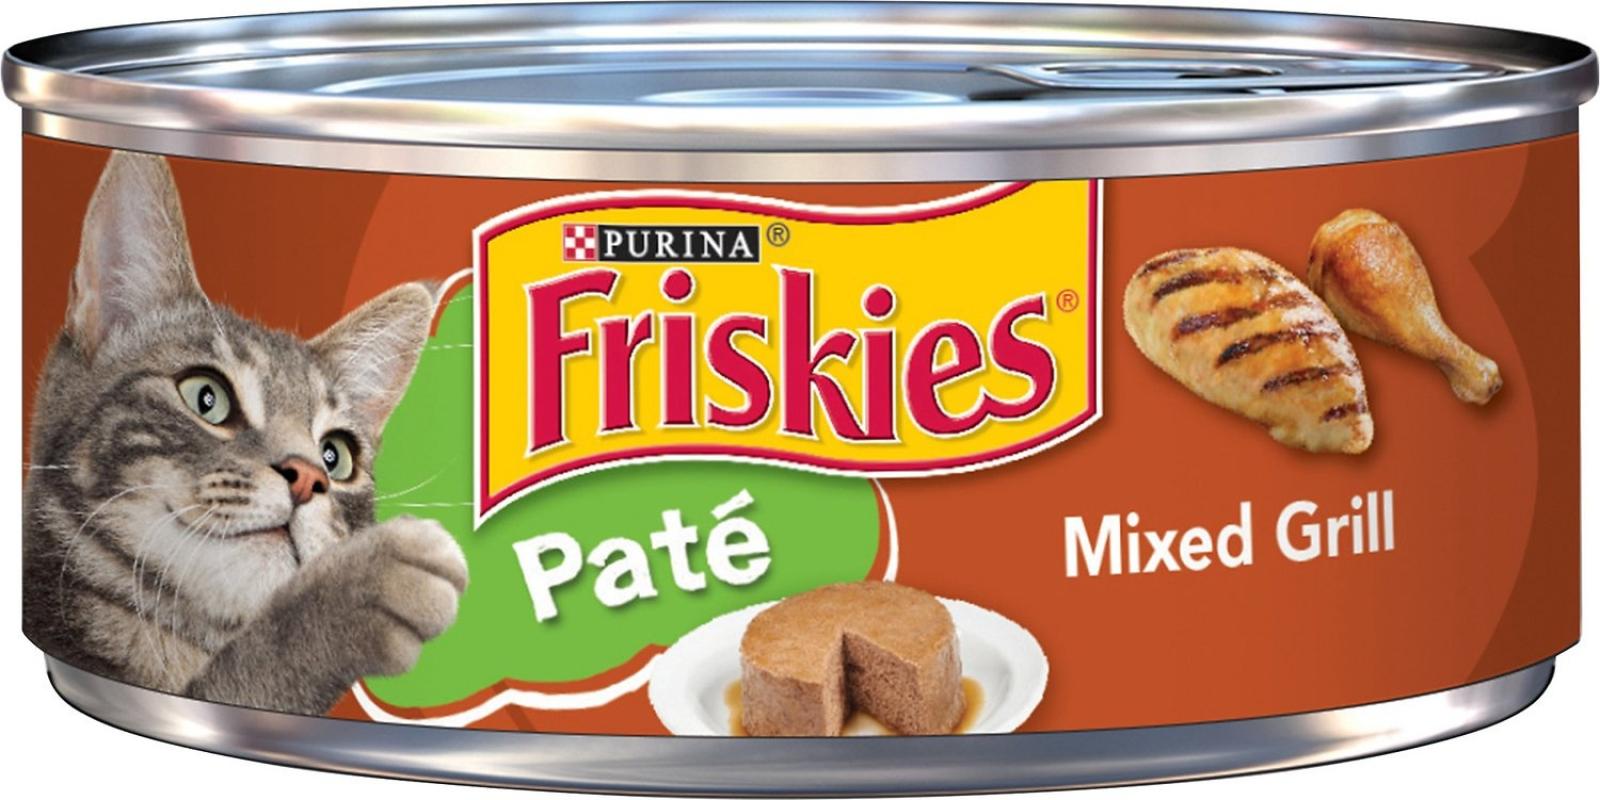 Purina Friskies Pate Mixed Grill